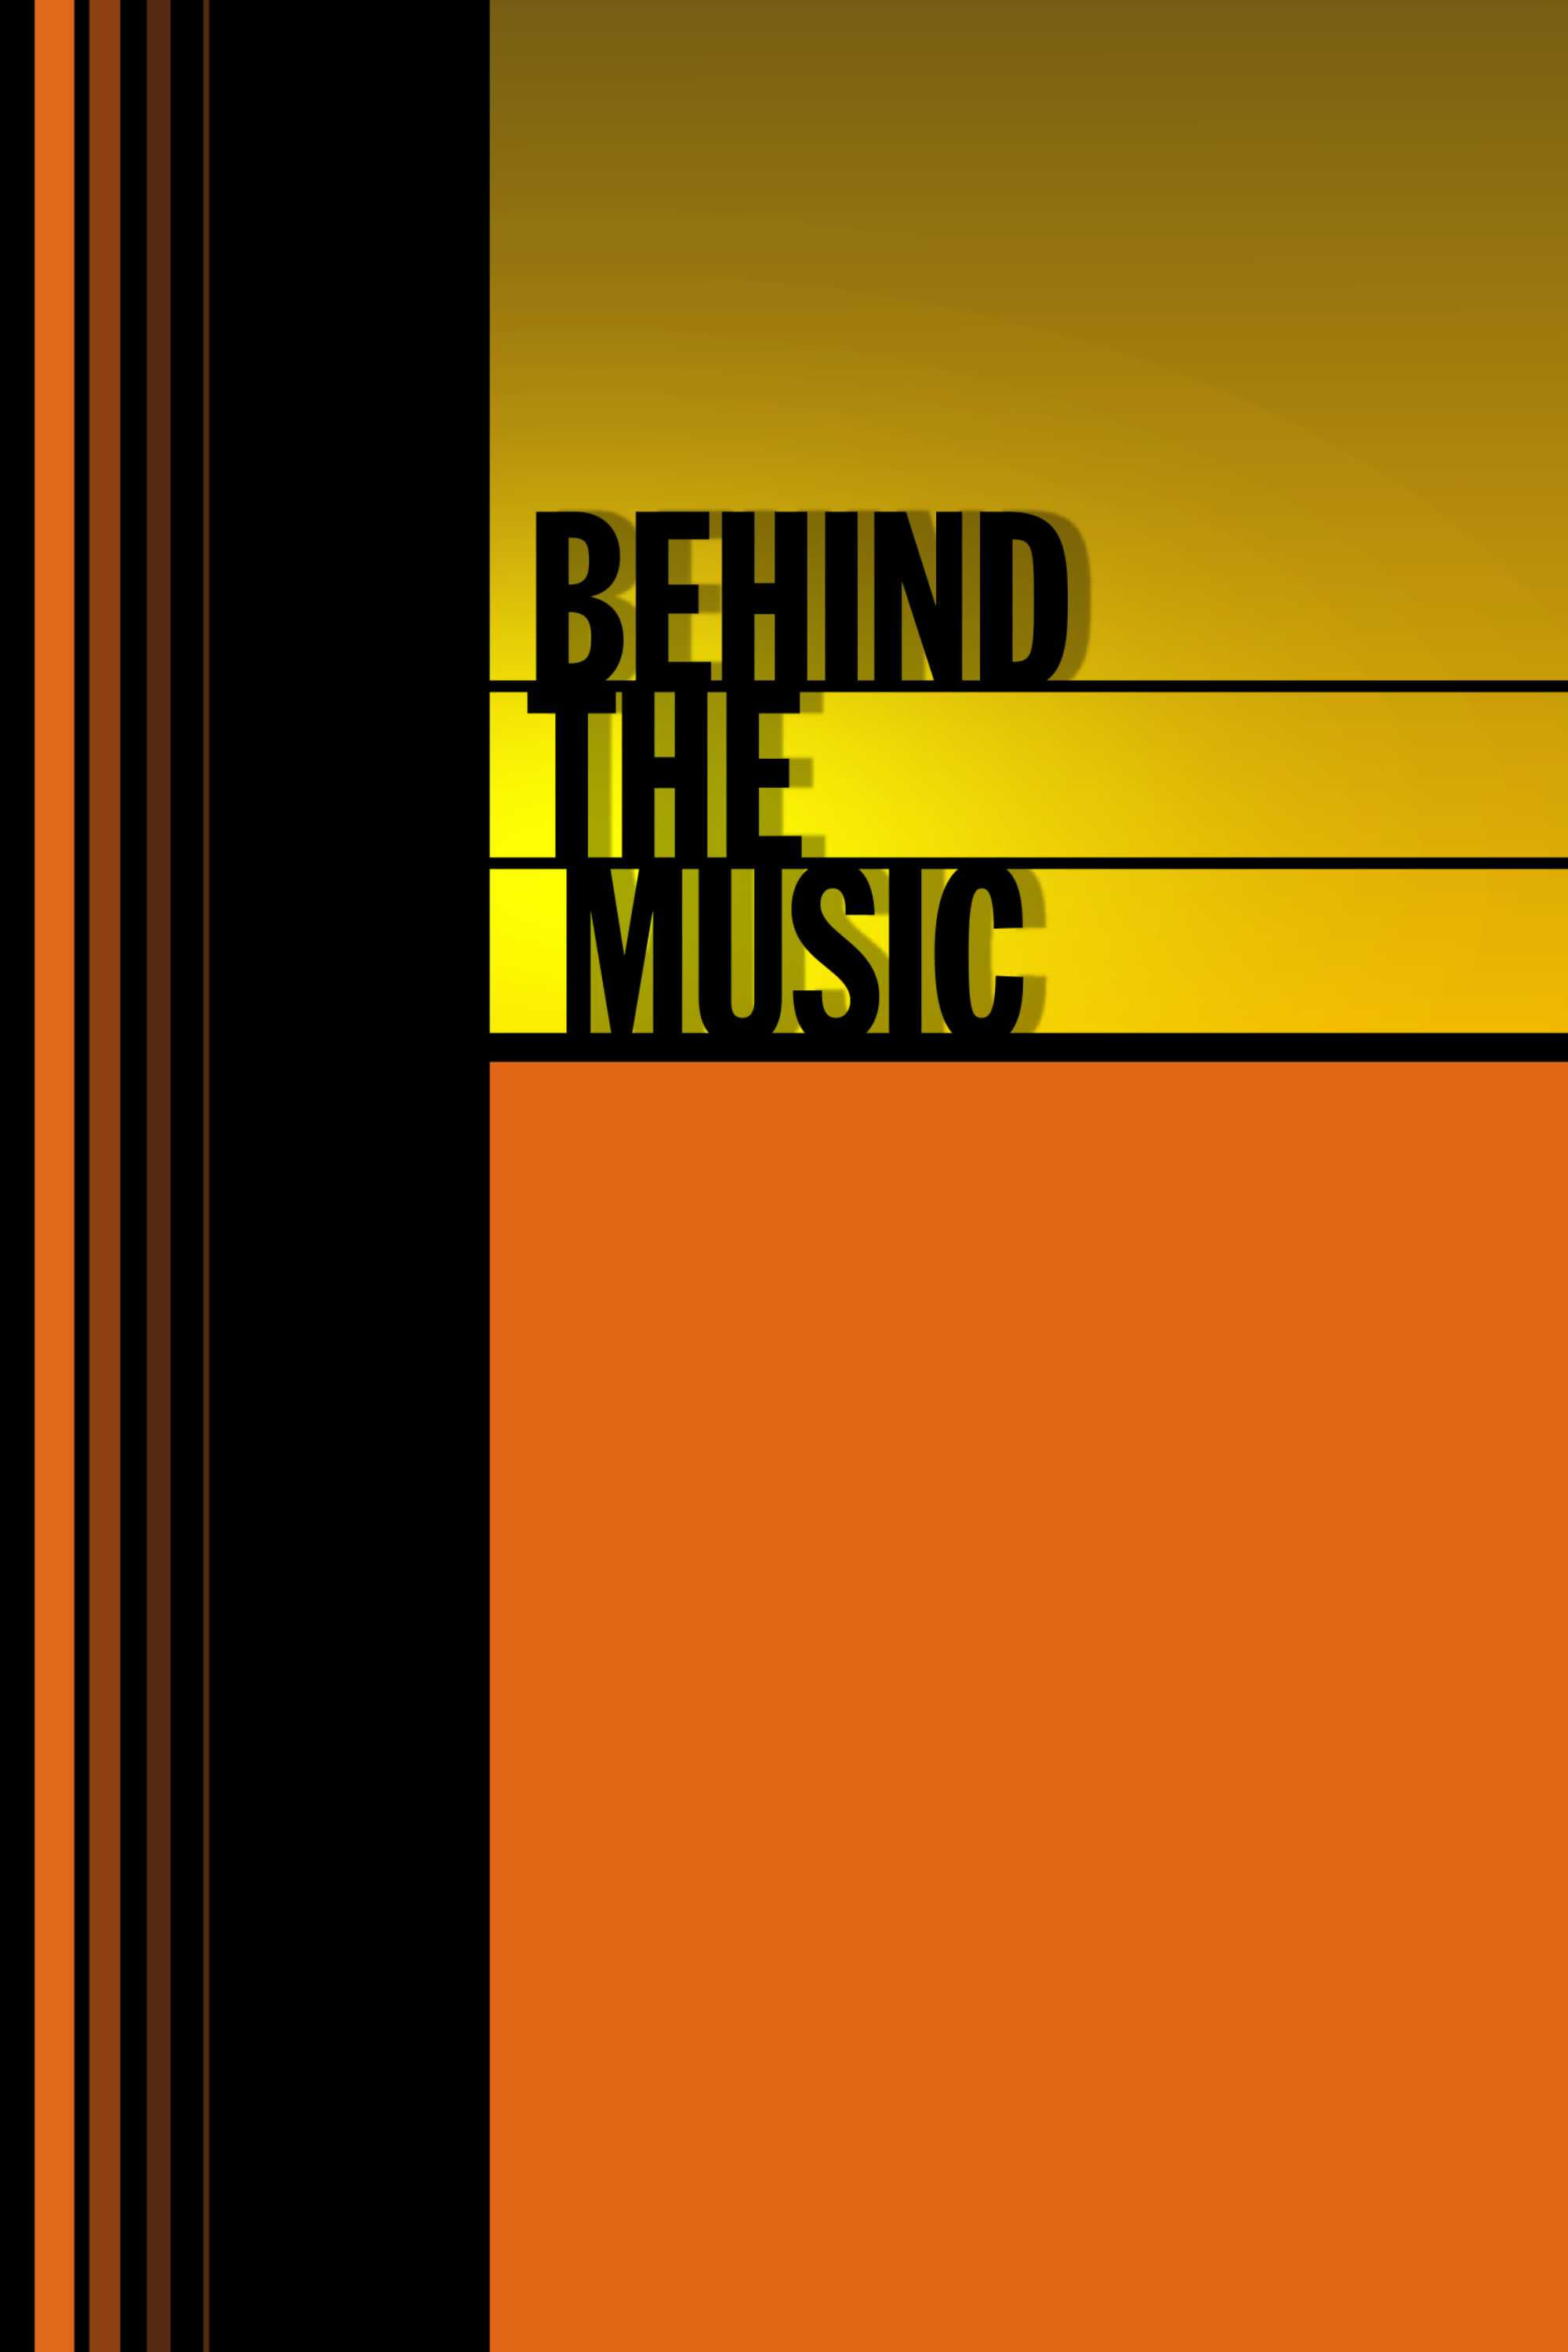 Behind the Music (1997)